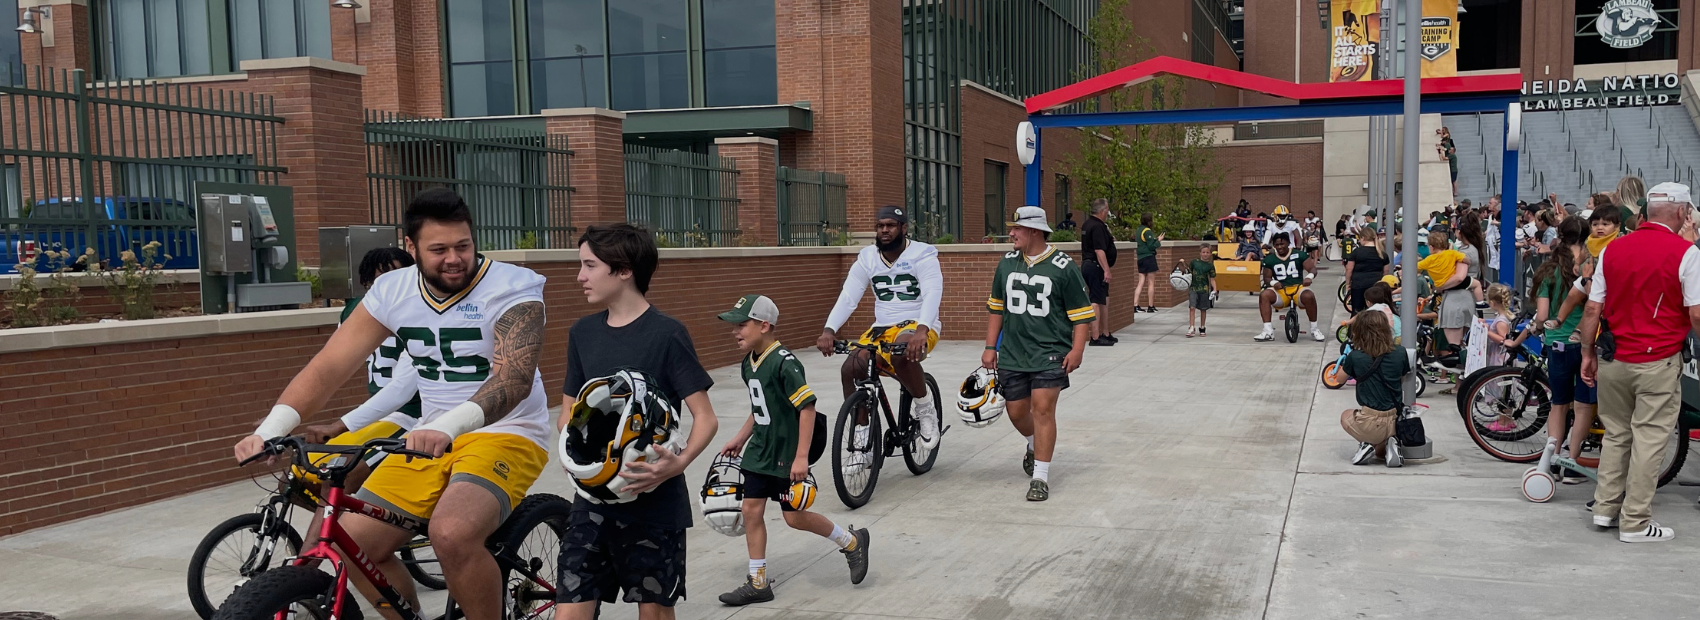 Celebrating 10th DreamDrive Anniversary with American Family Insurance and Packers